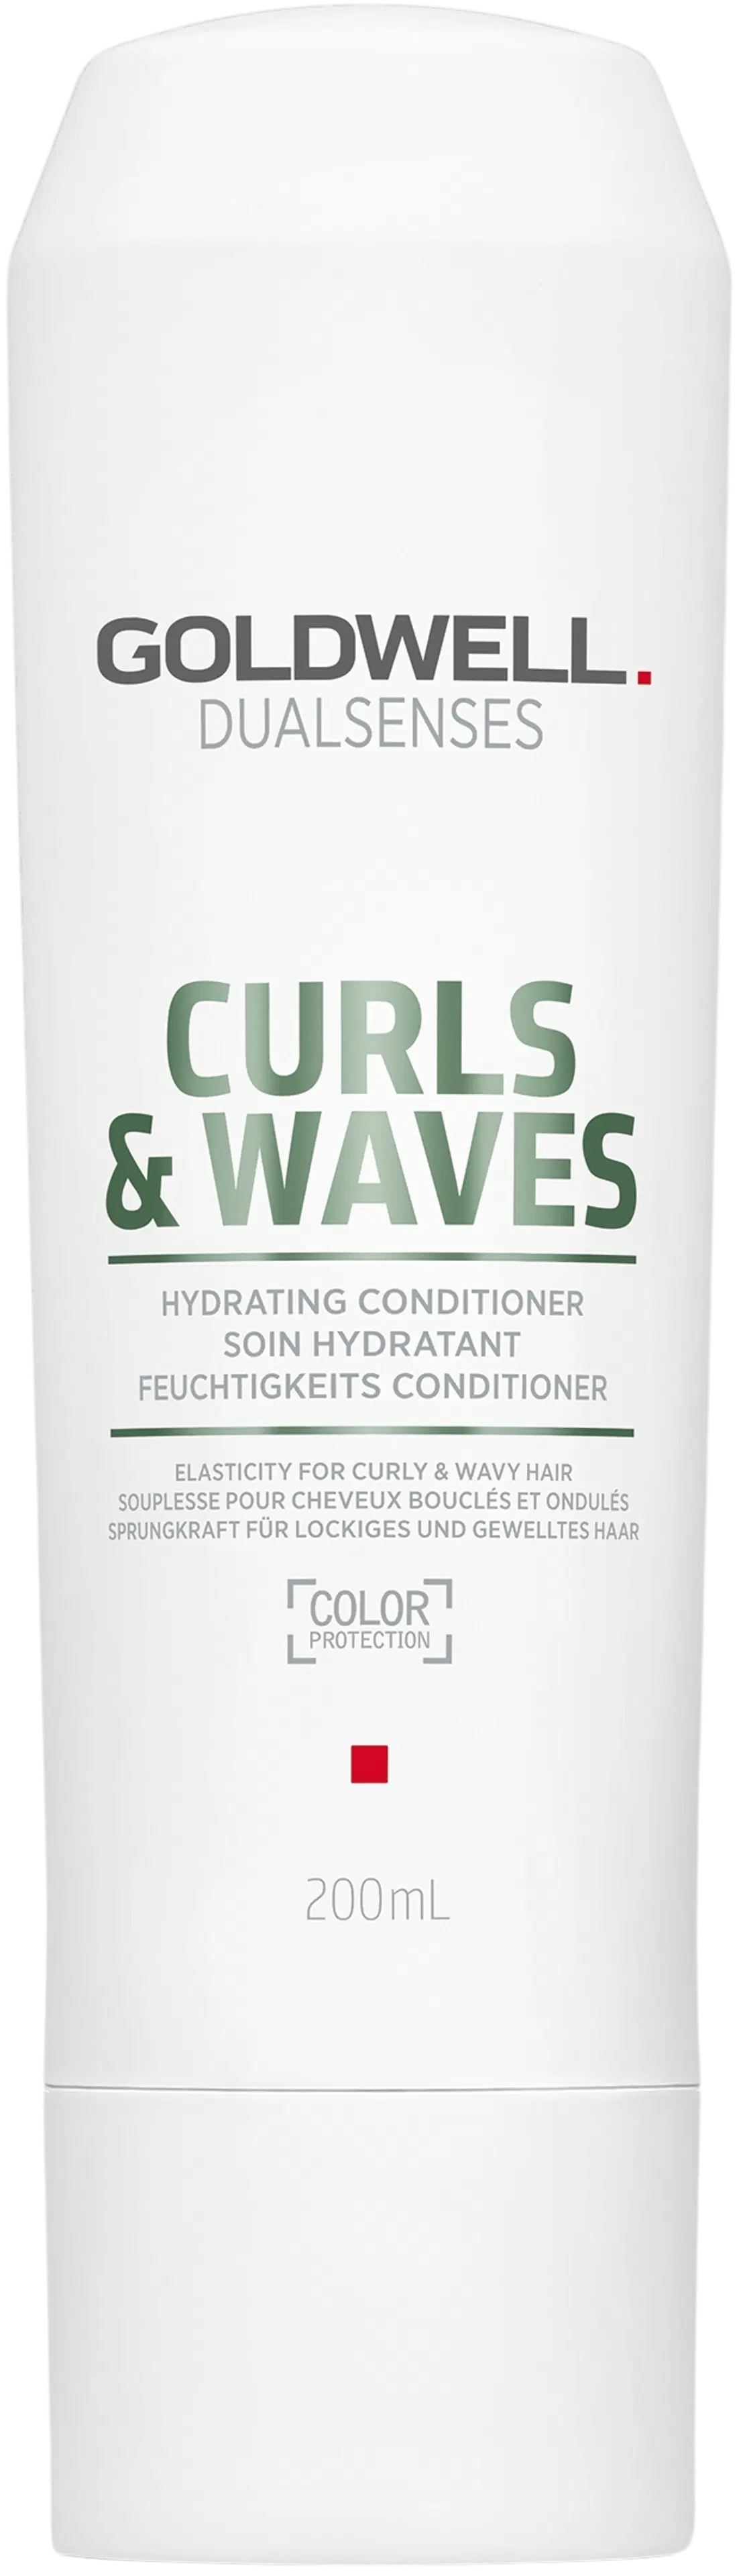 Goldwell Dualsenses Curls & Waves Hydrating Conditioner hoitoaine 200 ml